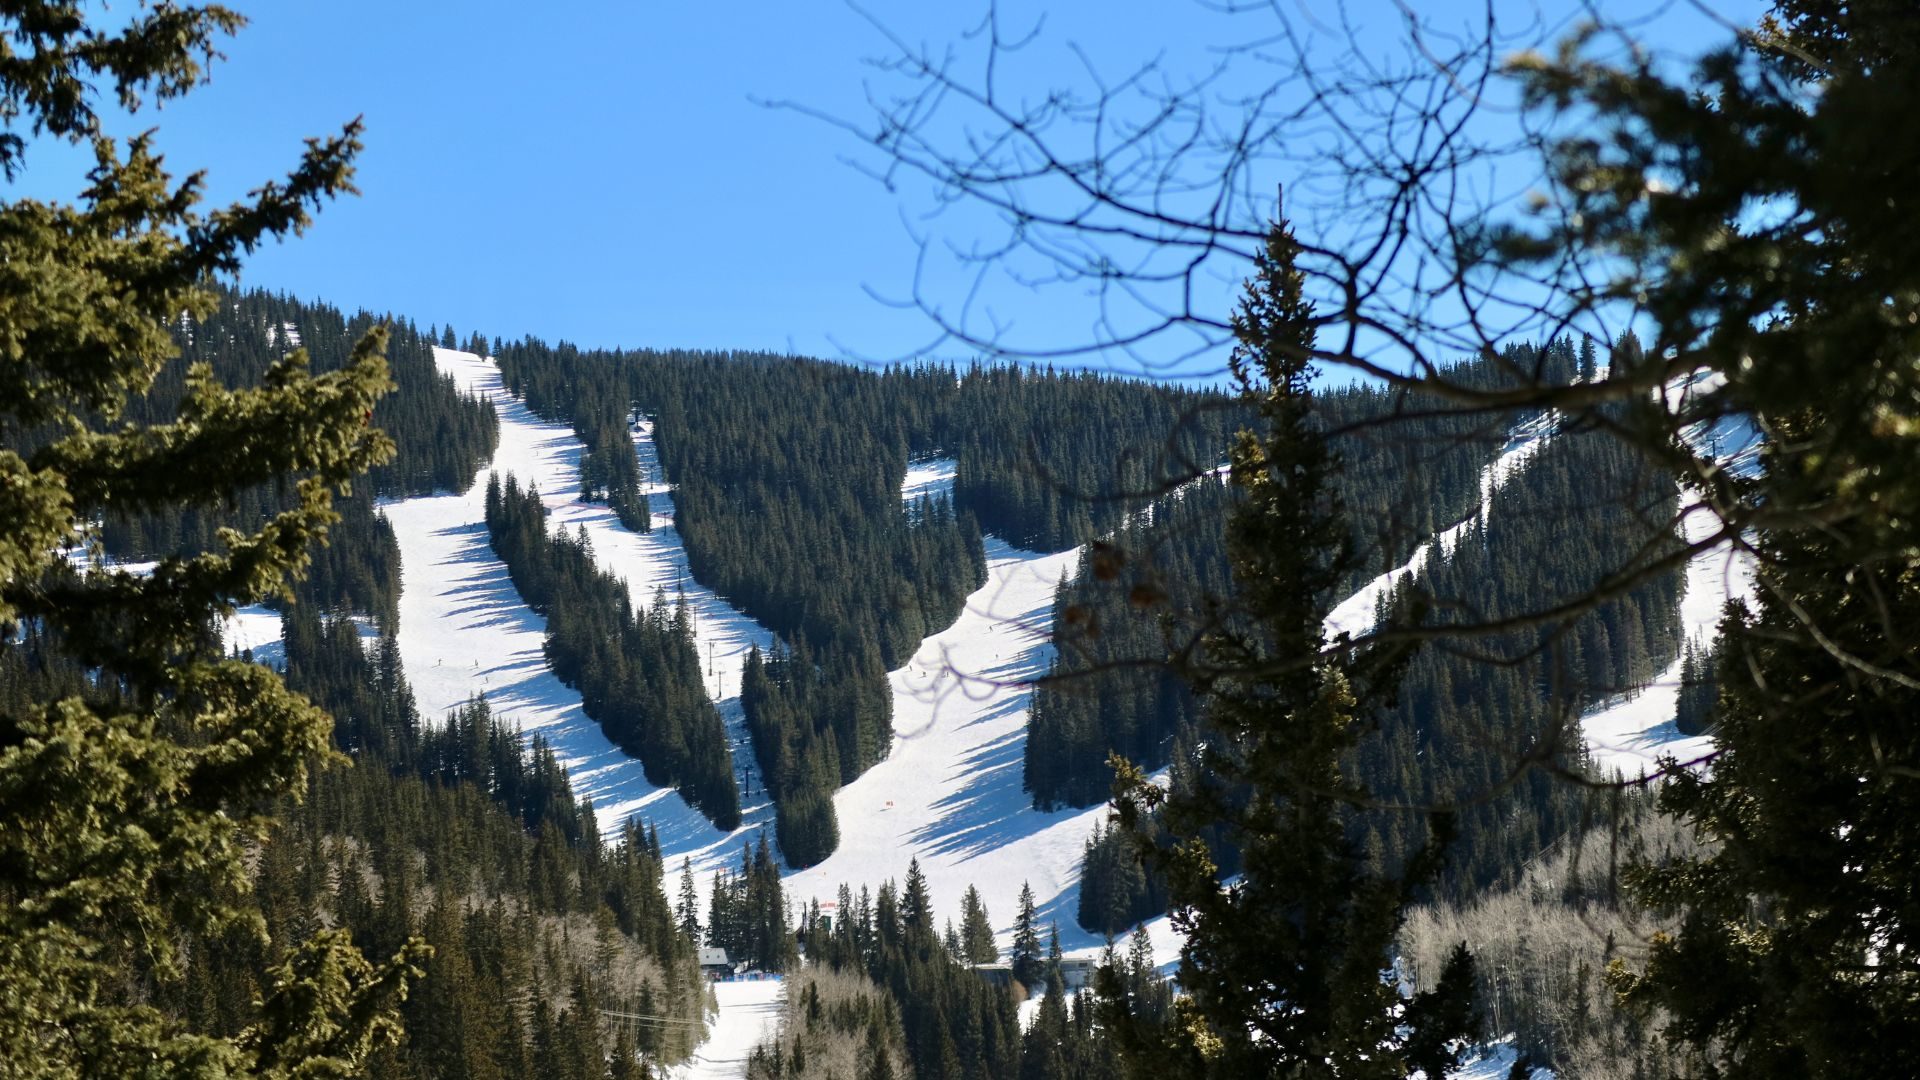 View of mountains with snow in the valleys